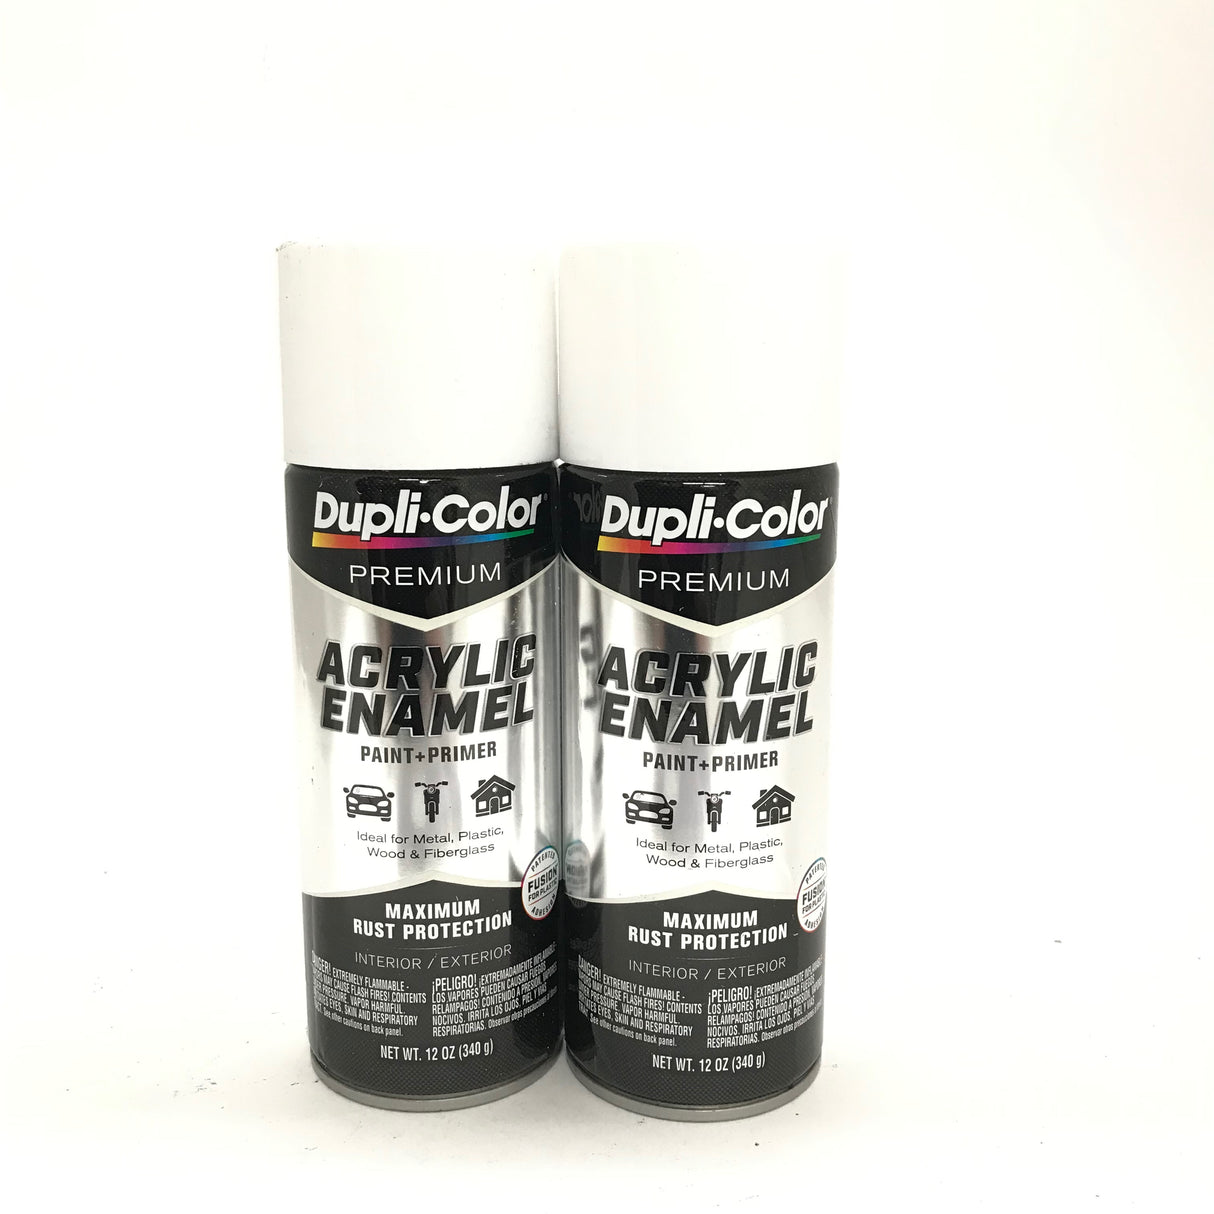 Duplicolor PAE110-2 PACK GLOSS WHITE Premium Acrylic Enamel -Max Rust Protection - 12 OZ